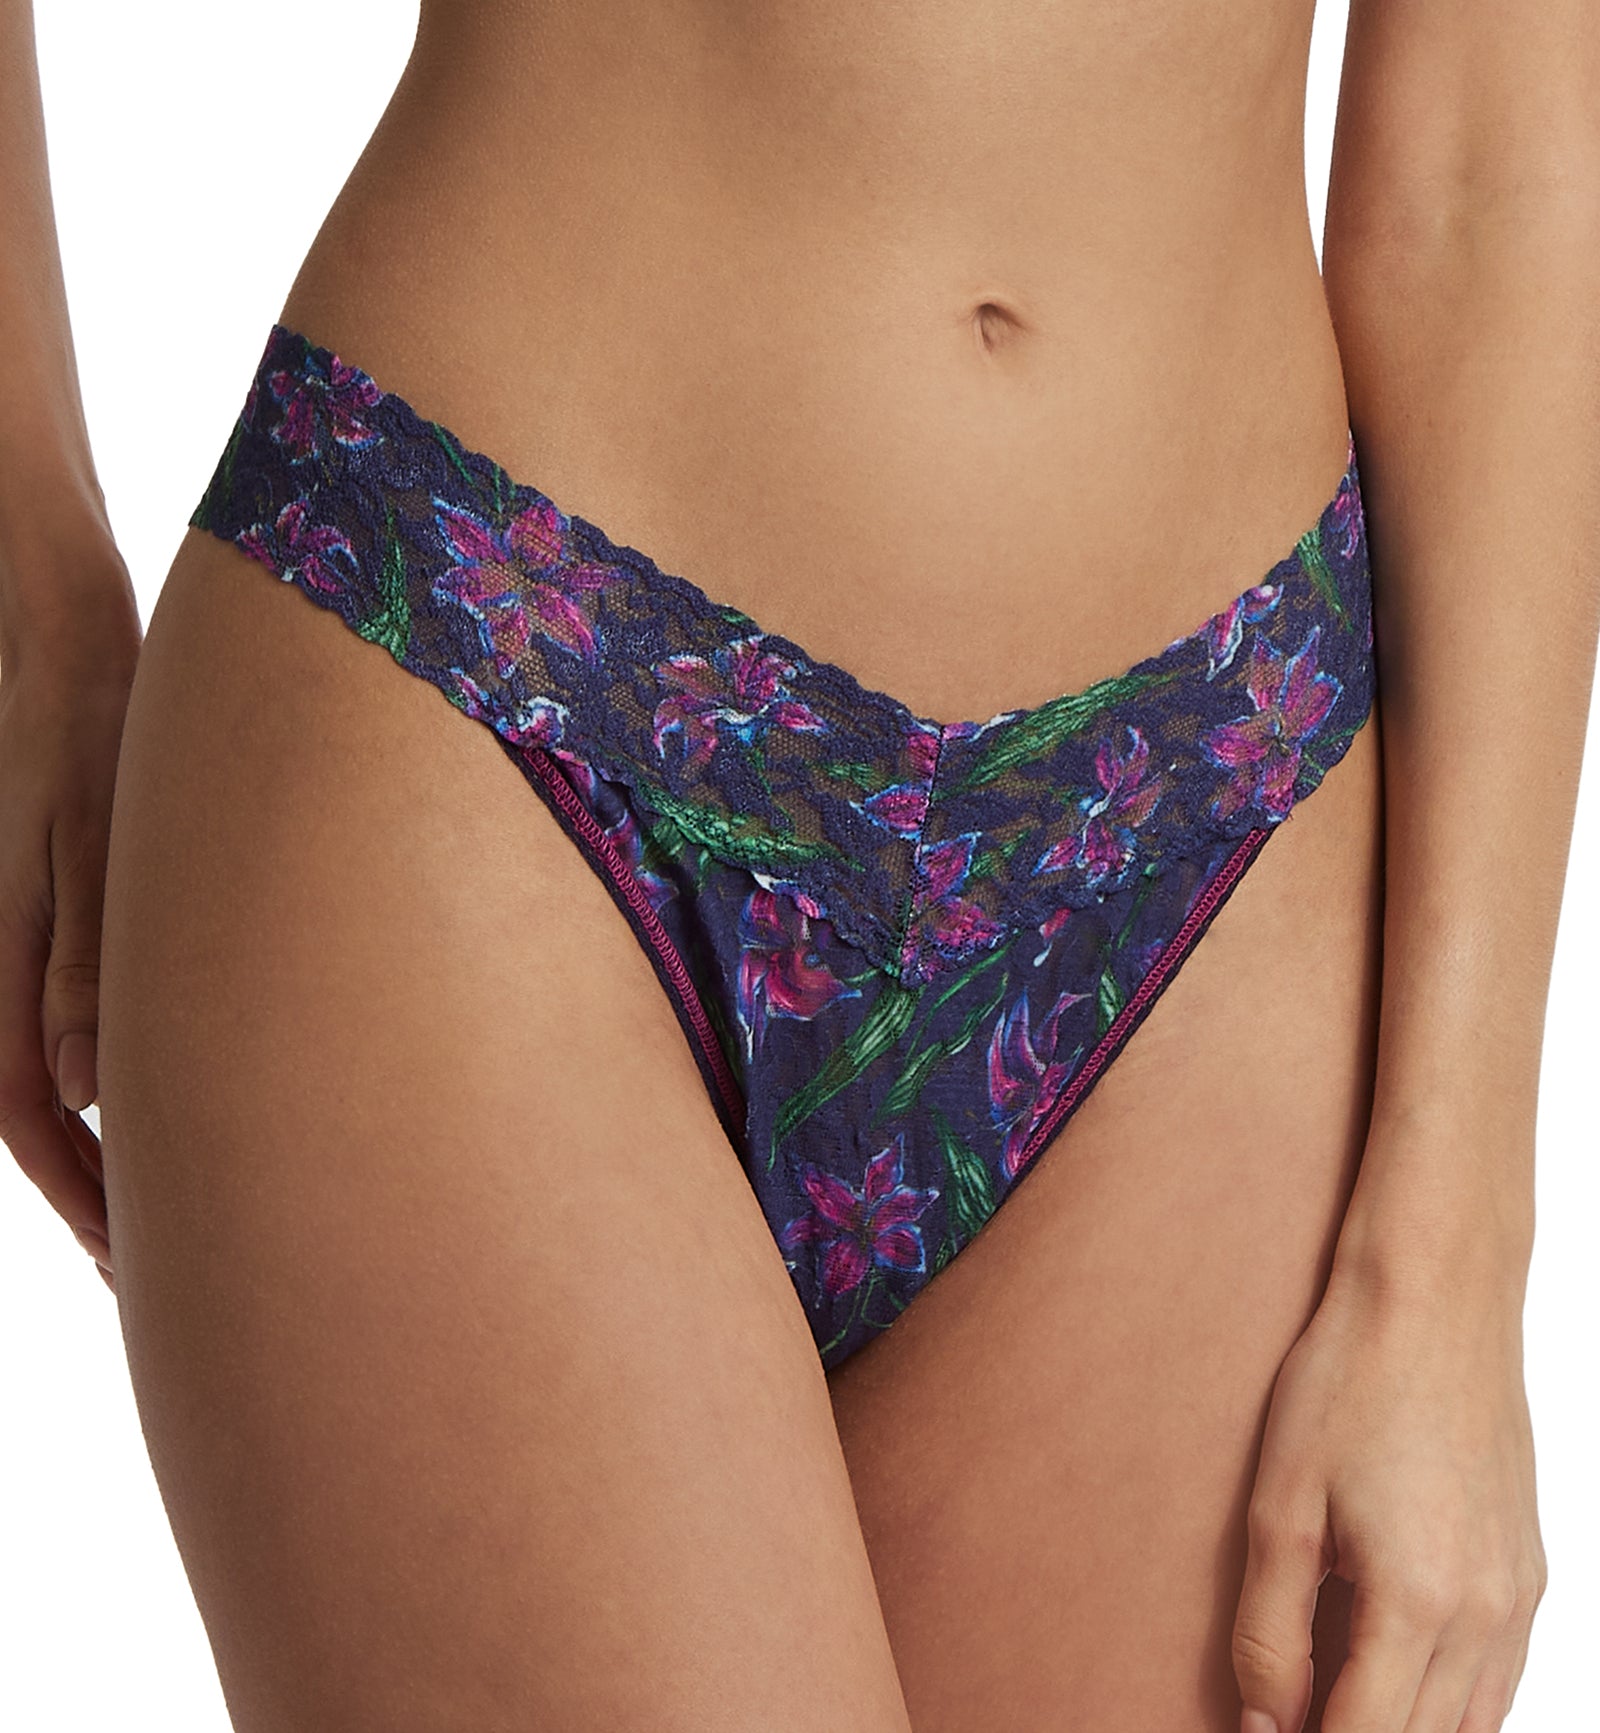 Hanky Panky Signature Lace Printed Original Rise Thong (PR4811P),Twilight Blooms - Twilight Blooms,One Size